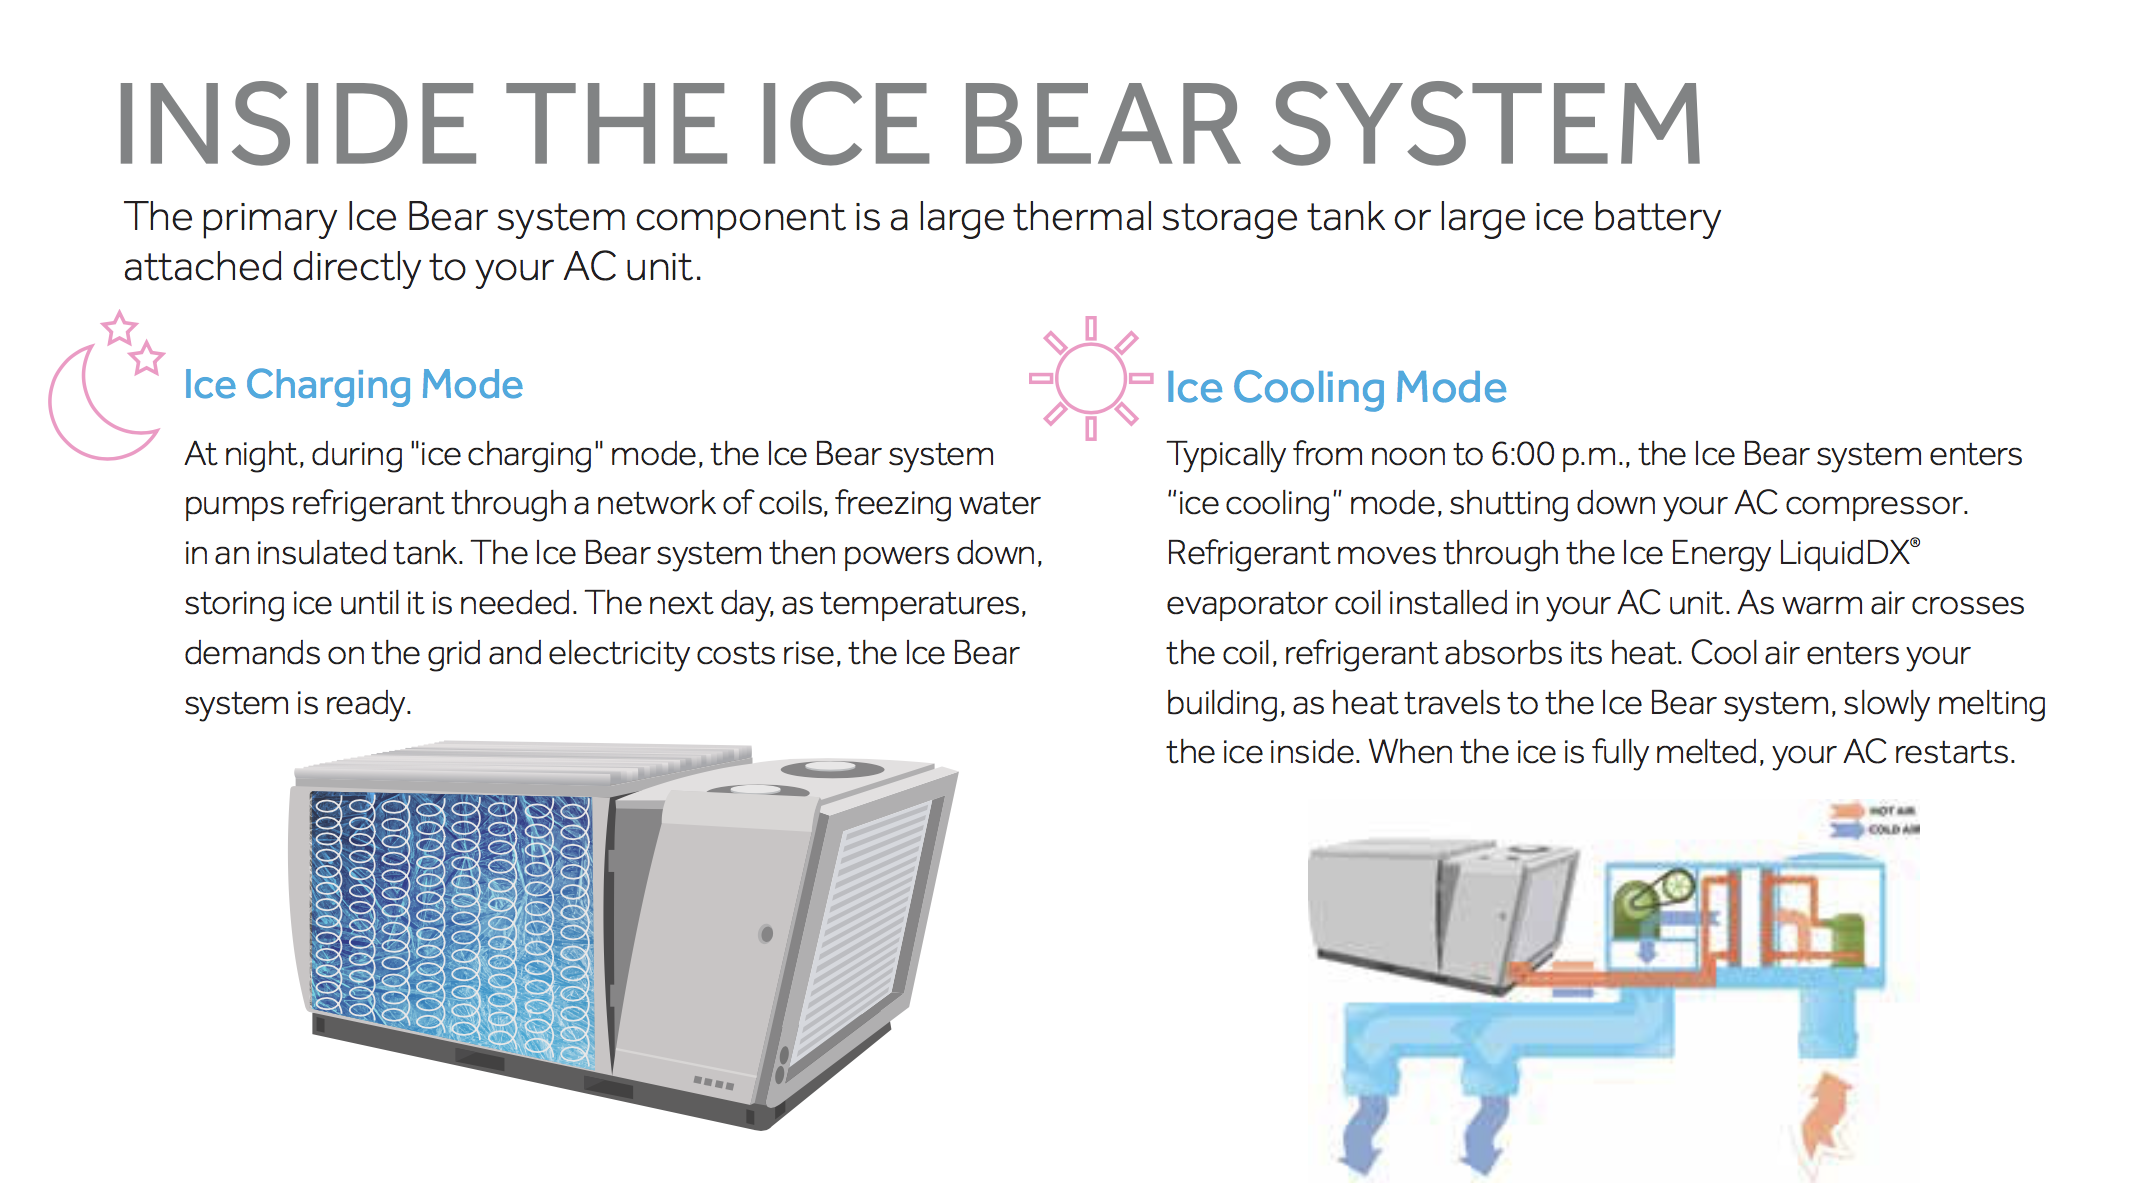 Ice storage air conditioning - Wikipedia